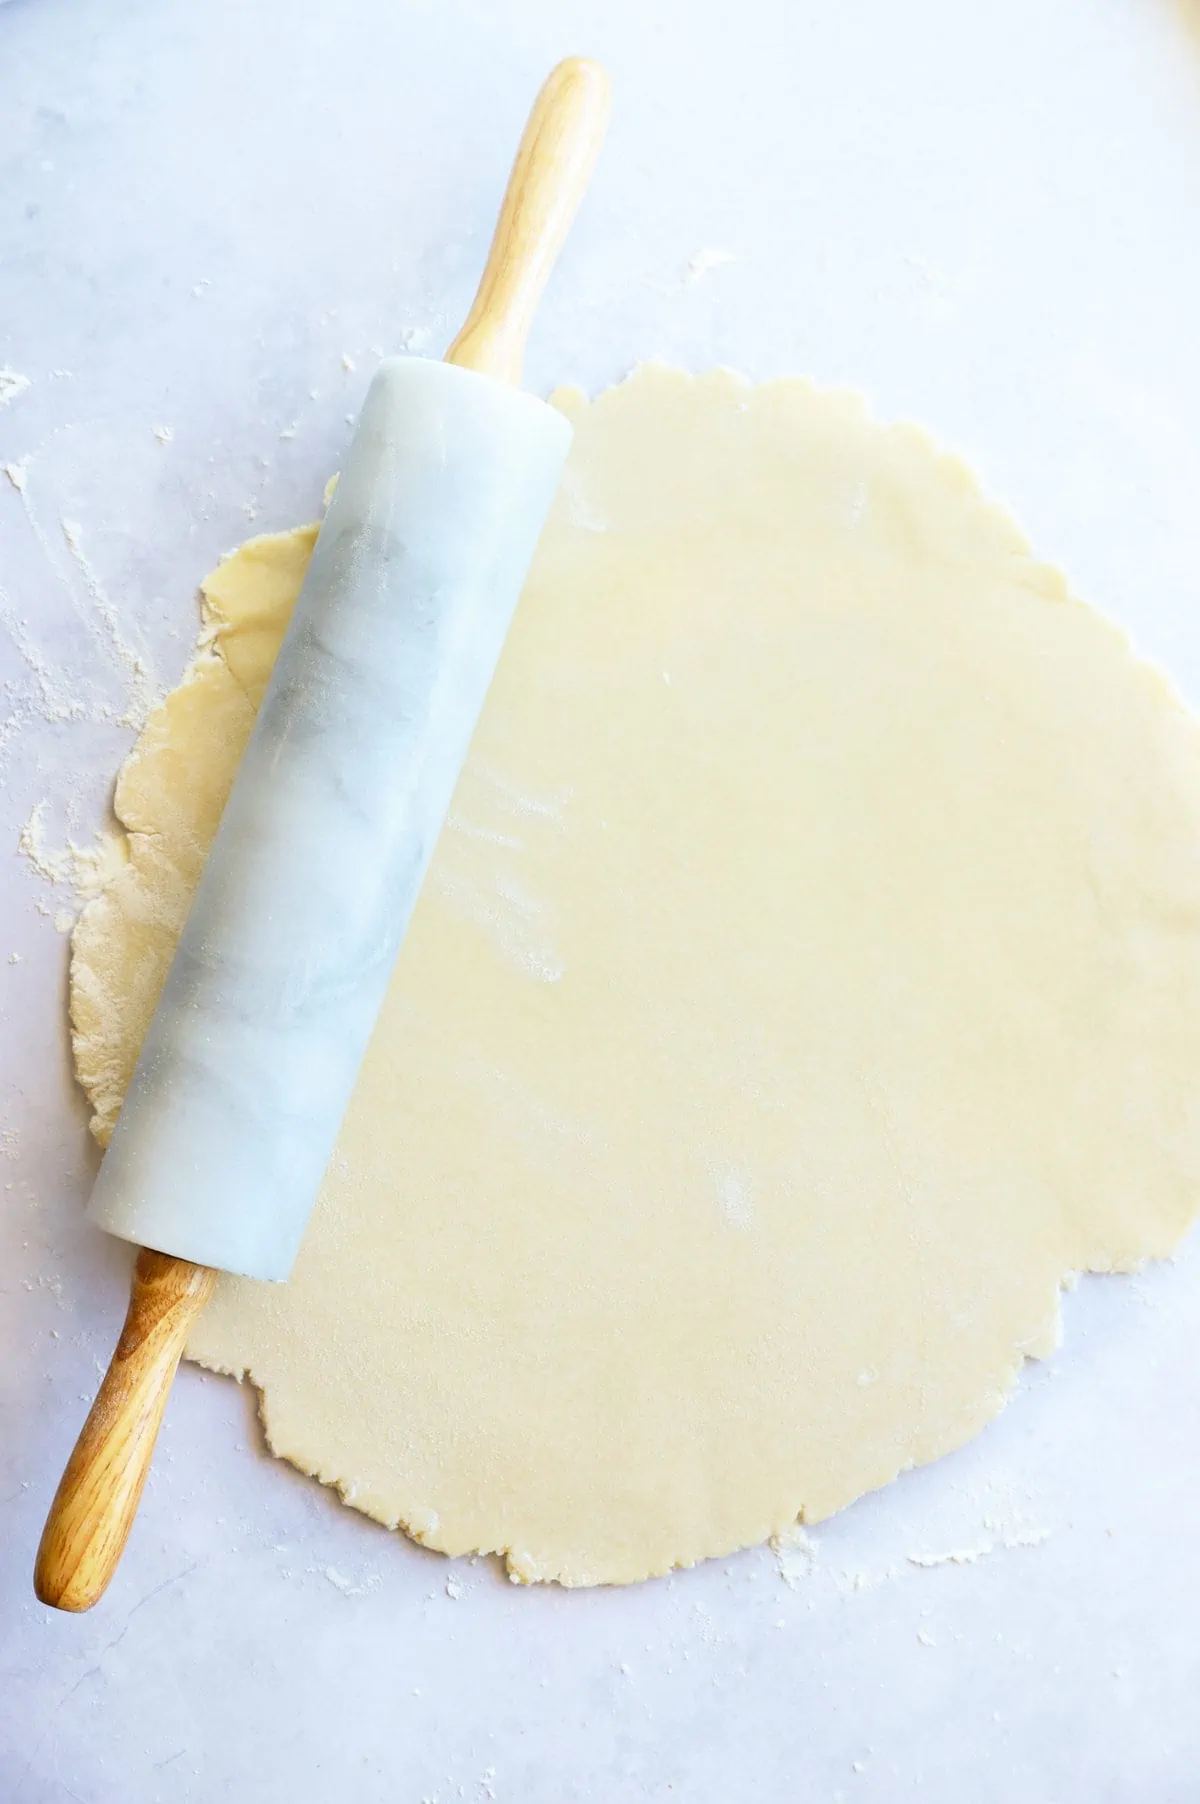 Galette dough rolled out with rolling pin image